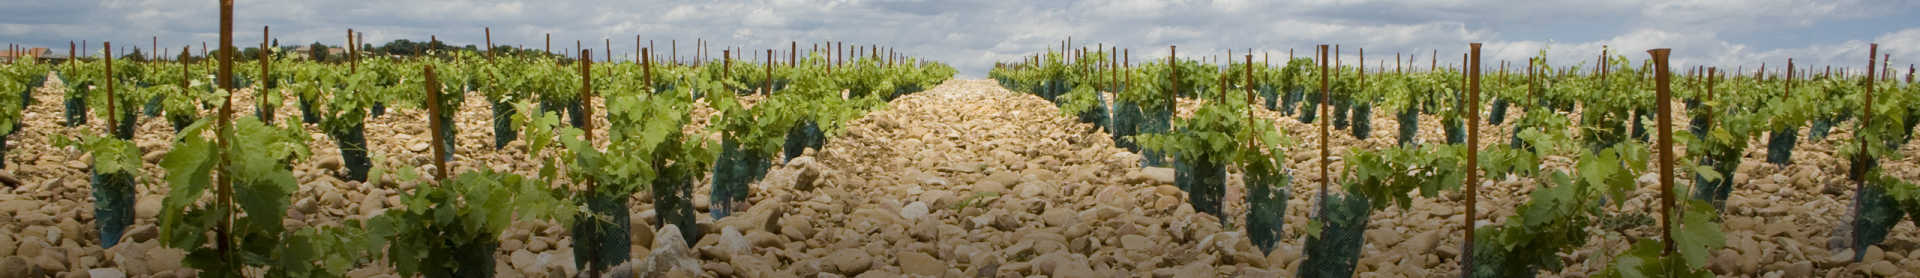 Image for Châteauneuf-du-Pape Wine content section